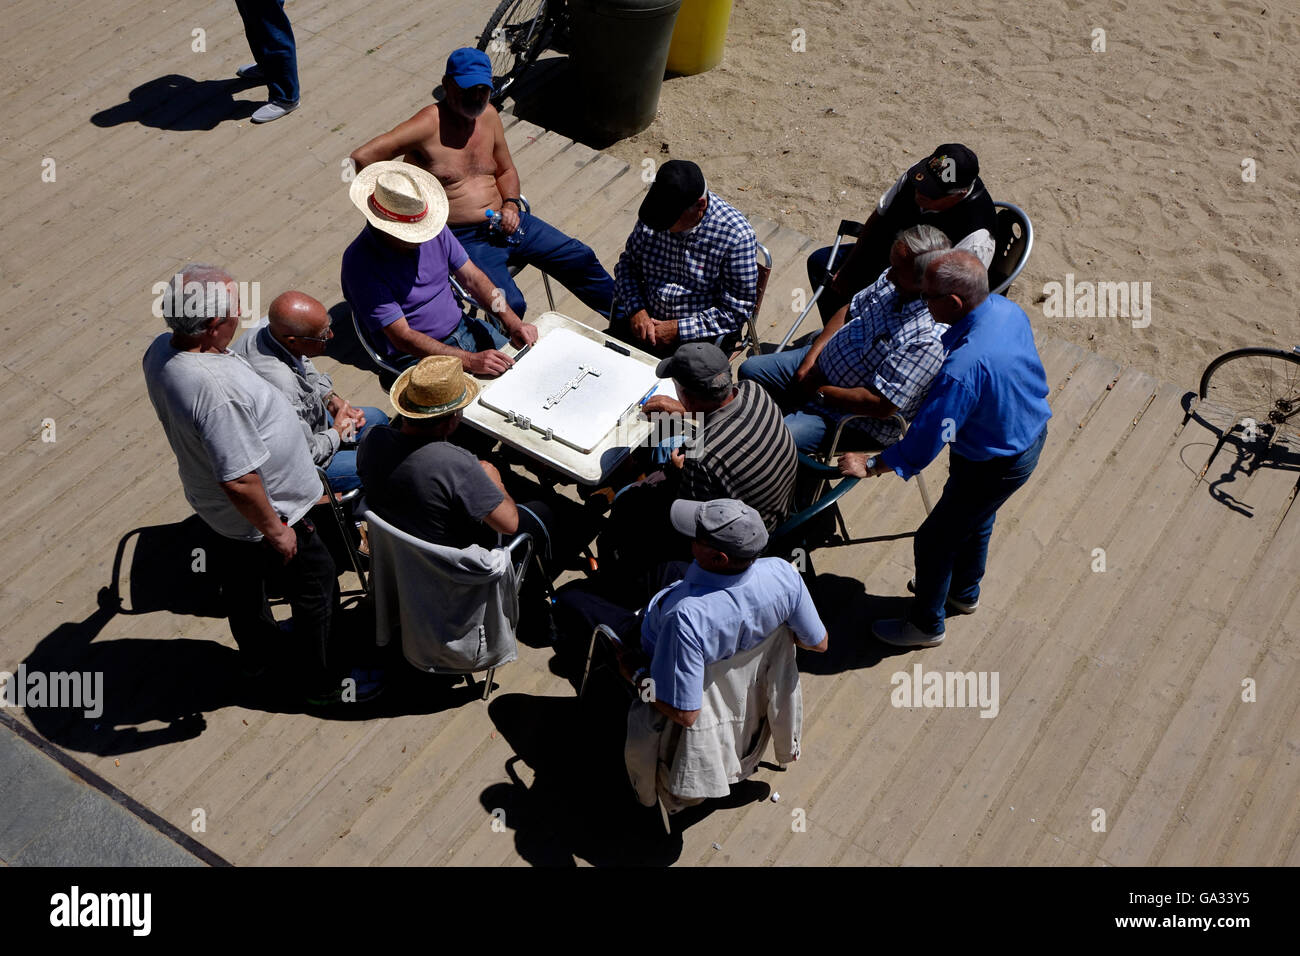 A group of men enjoy watching a game of dominos on the boardwalk at Barcelona's Platja Nova Icaria. Stock Photo